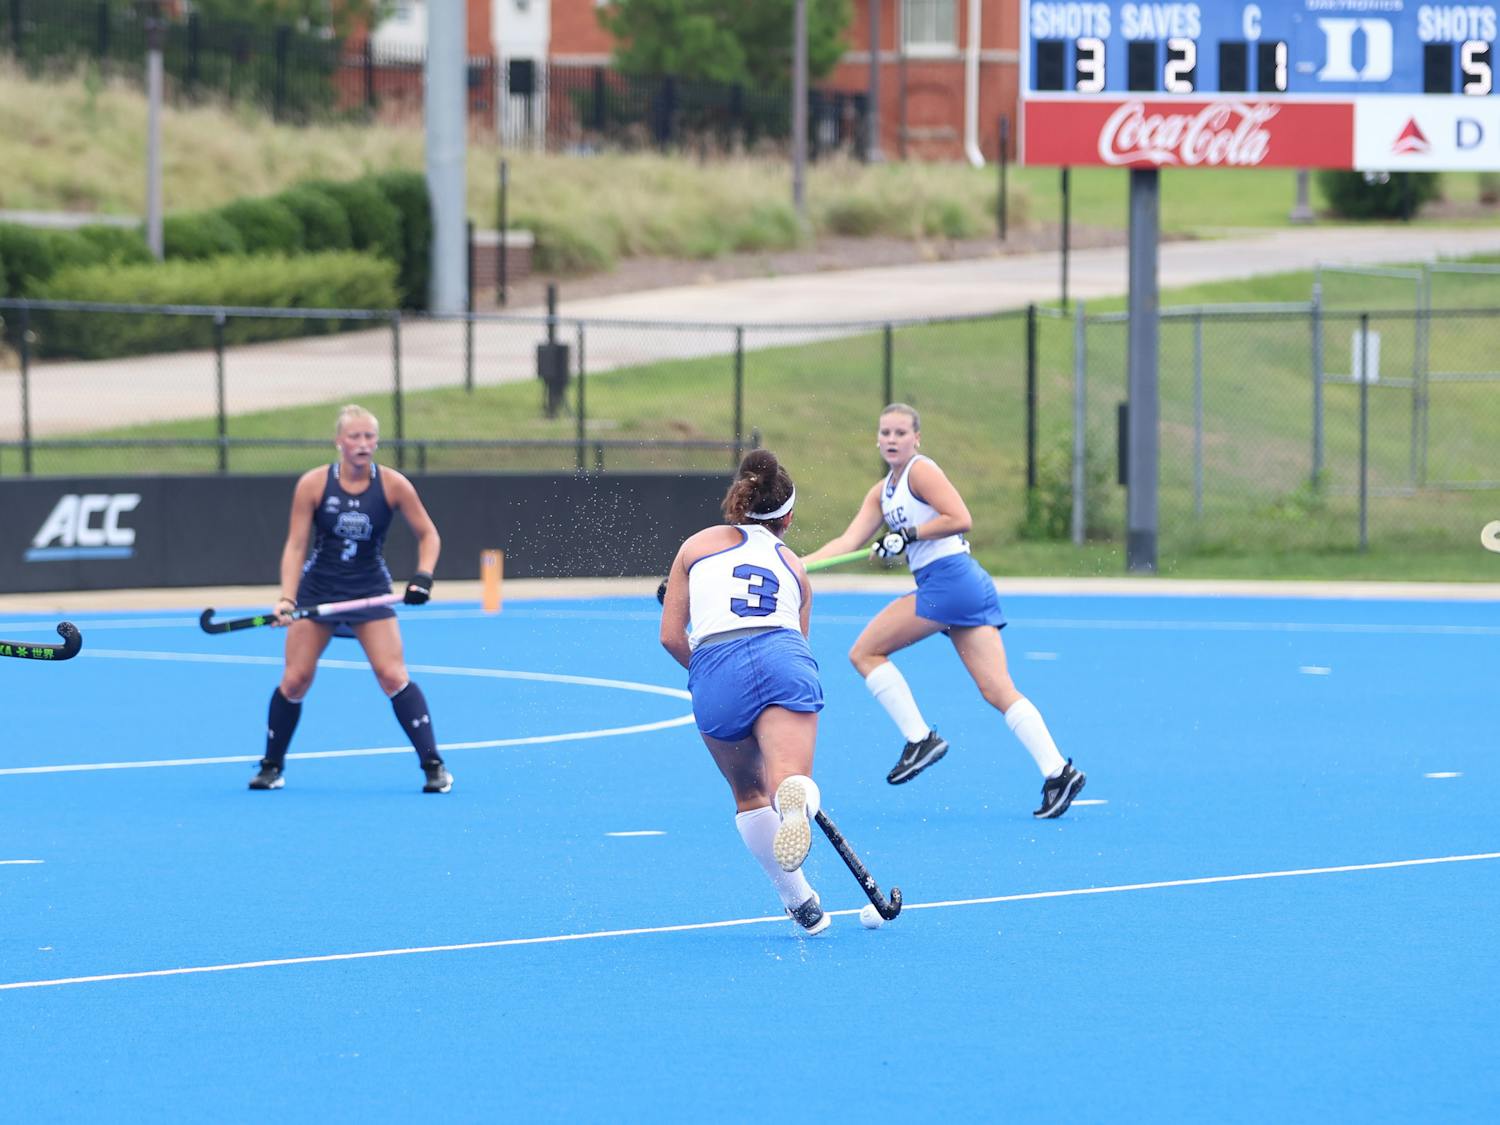 No. 4 Duke field hockey will look to continue its eight-game win streak against Virginia.